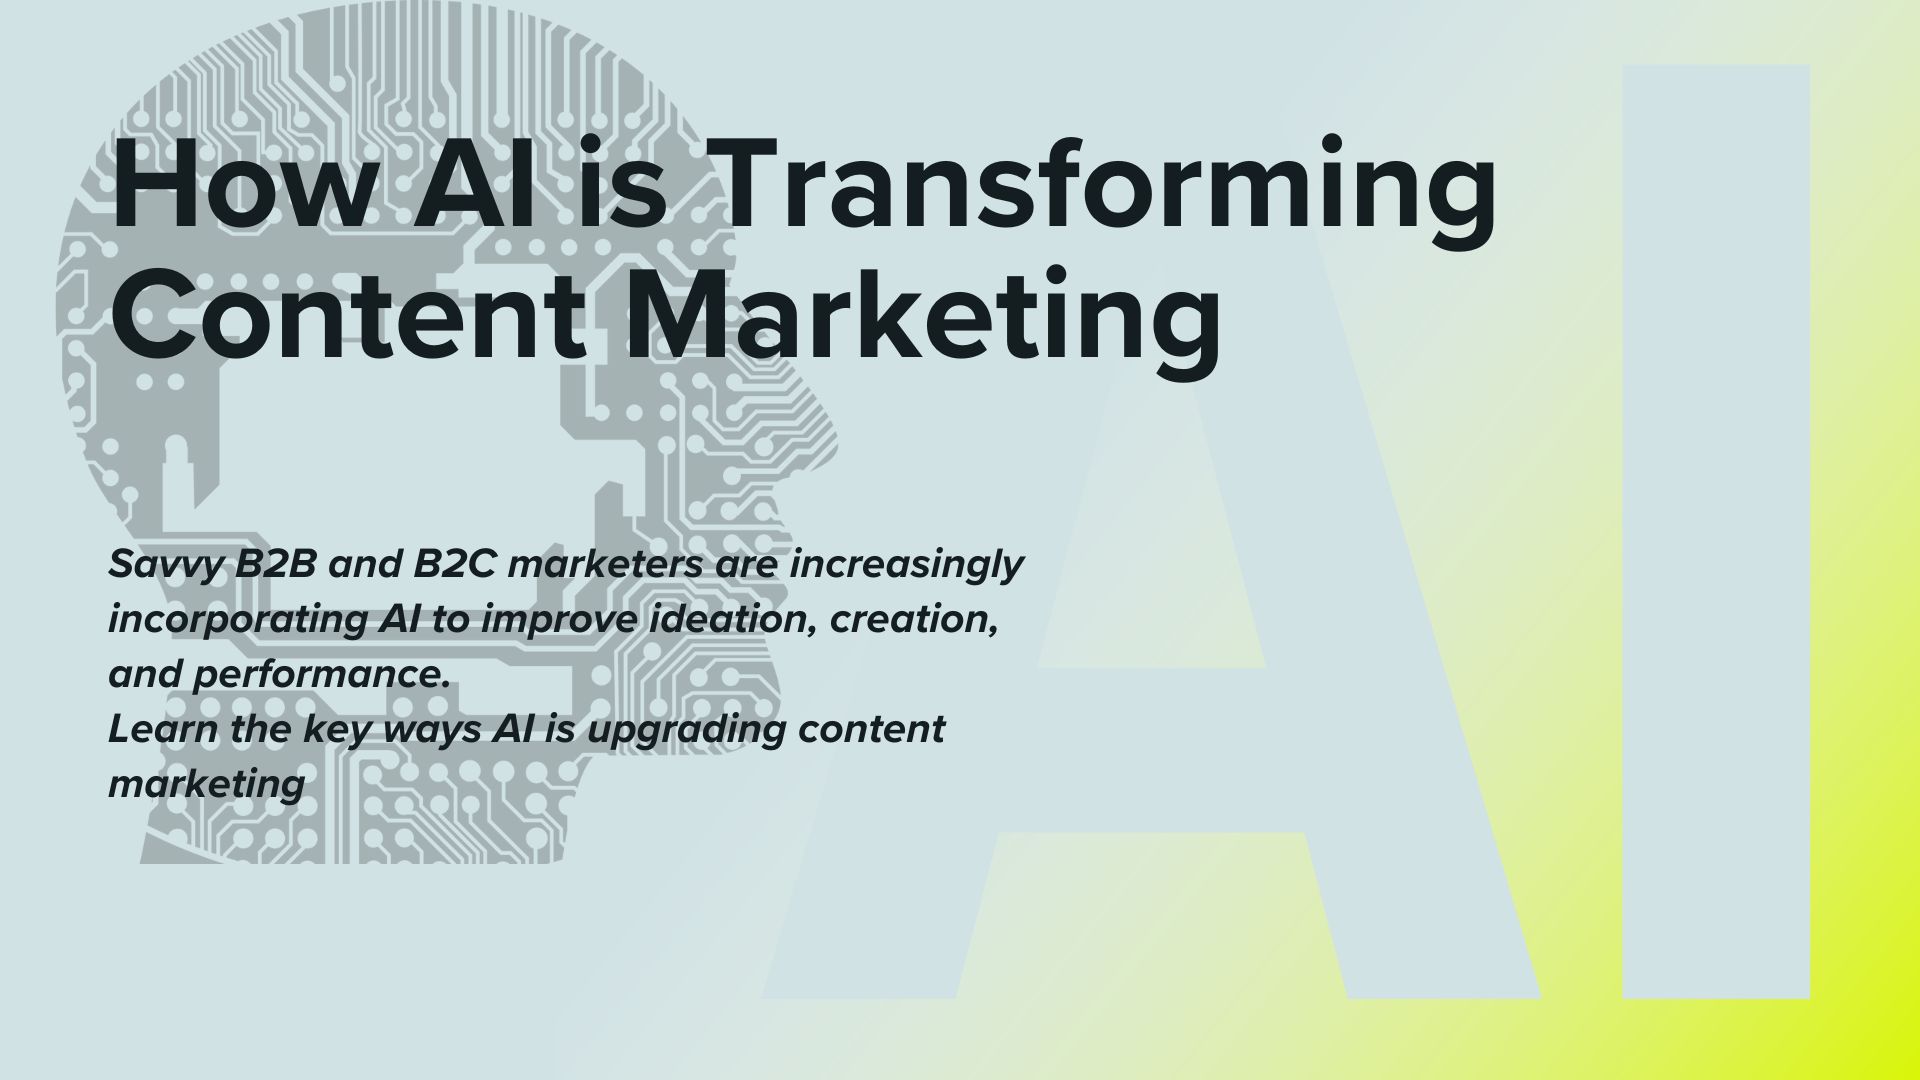 How AI is Transforming Content Marketing